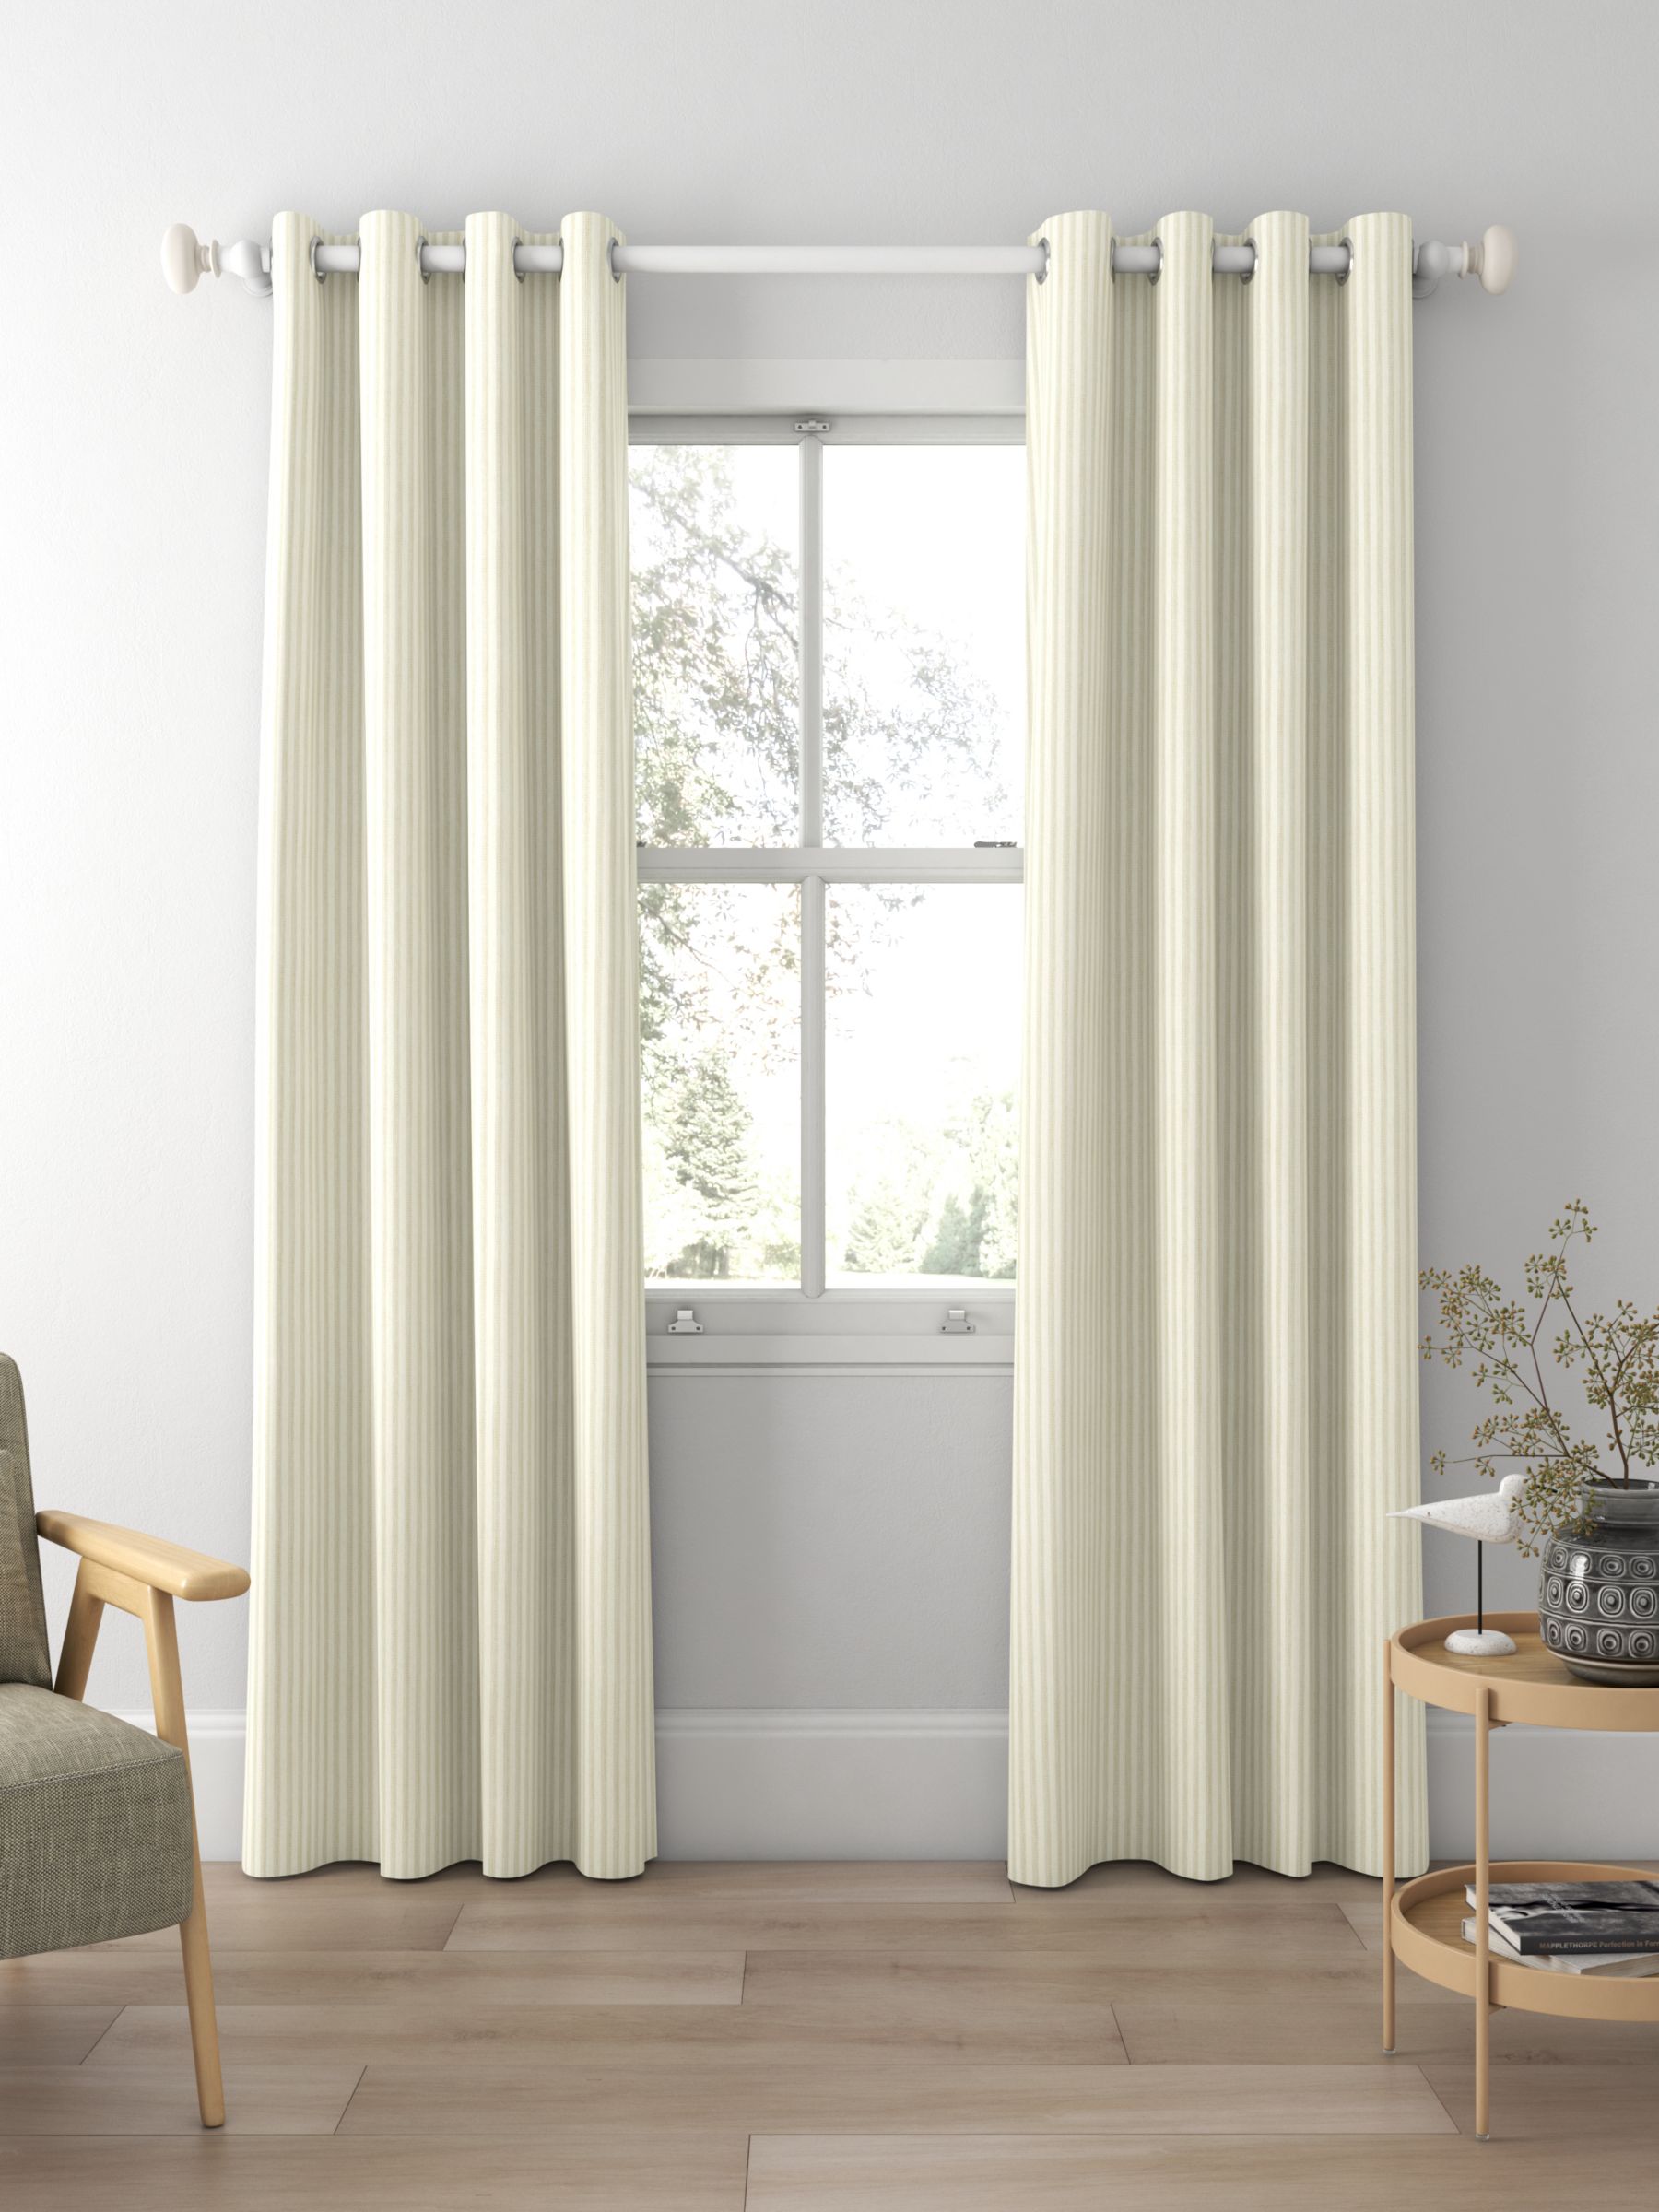 Sanderson Melford Made to Measure Curtains, Natural